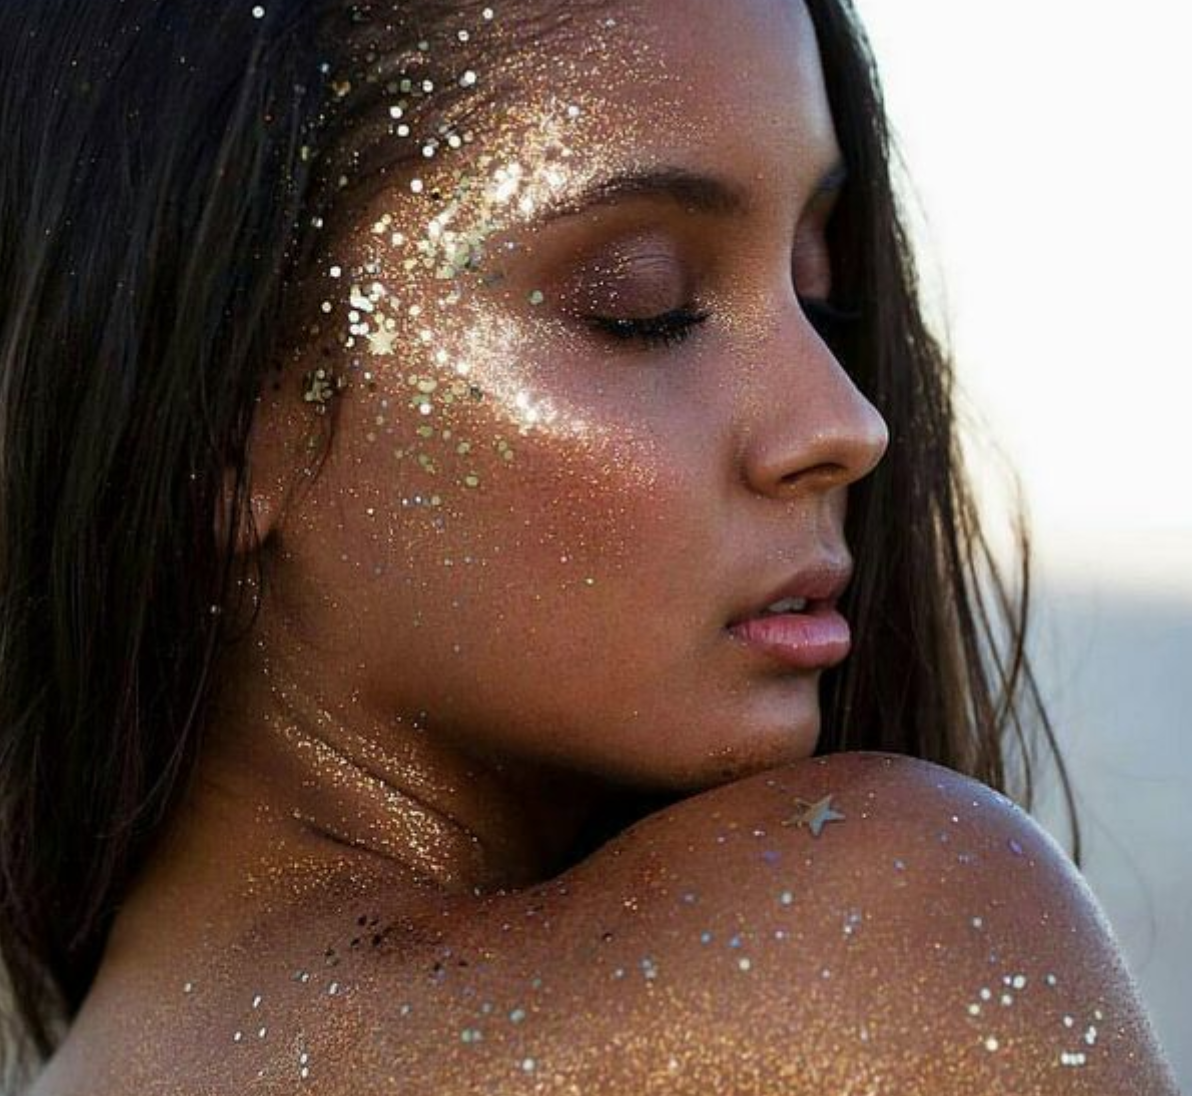 A New Biodegradable Glitter Is Here Thanks to Cambridge